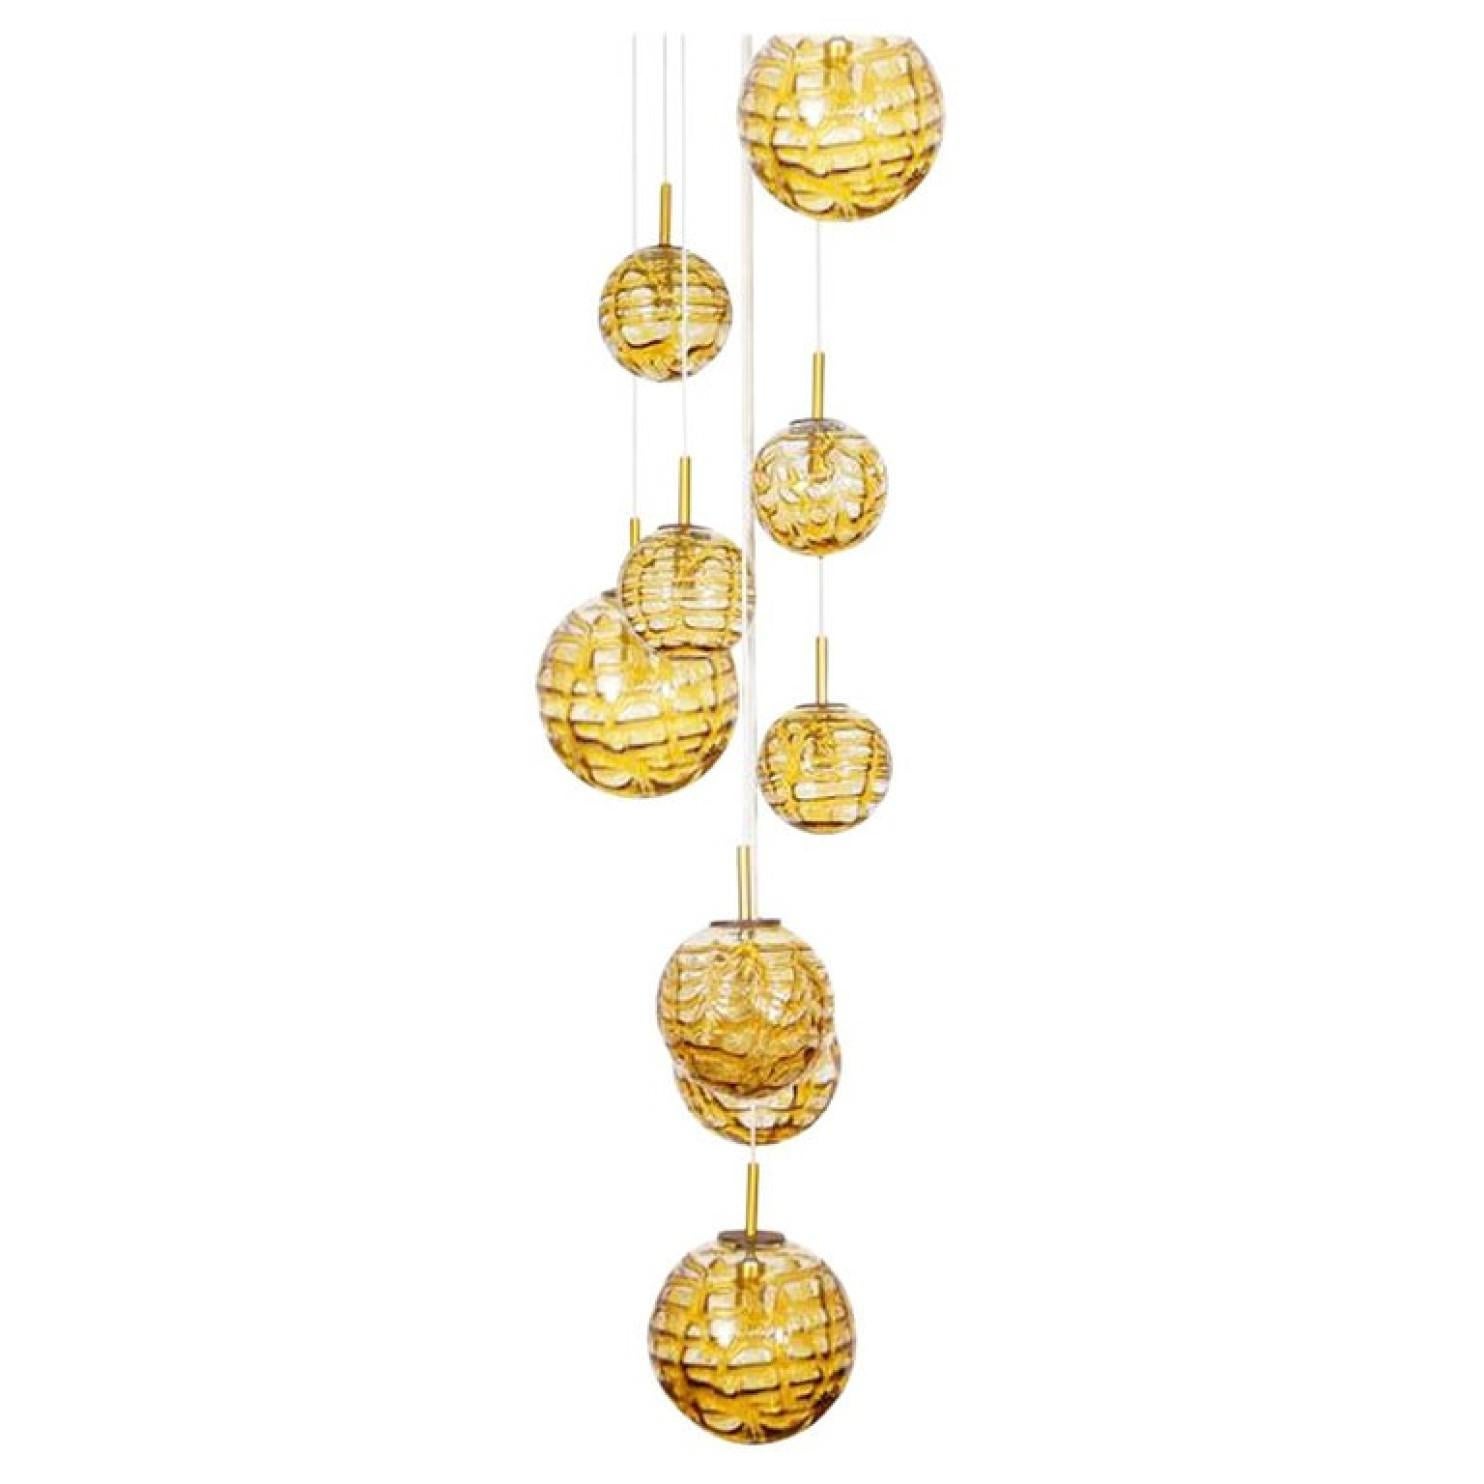 Stunning nine amber Murano glass globes chandelier flush mount. Outstanding high- end quality hand blown design with an amazing color.
A statement piece in the any room. Wonderful light effect due to lovely glass elements.

We can deliver with a